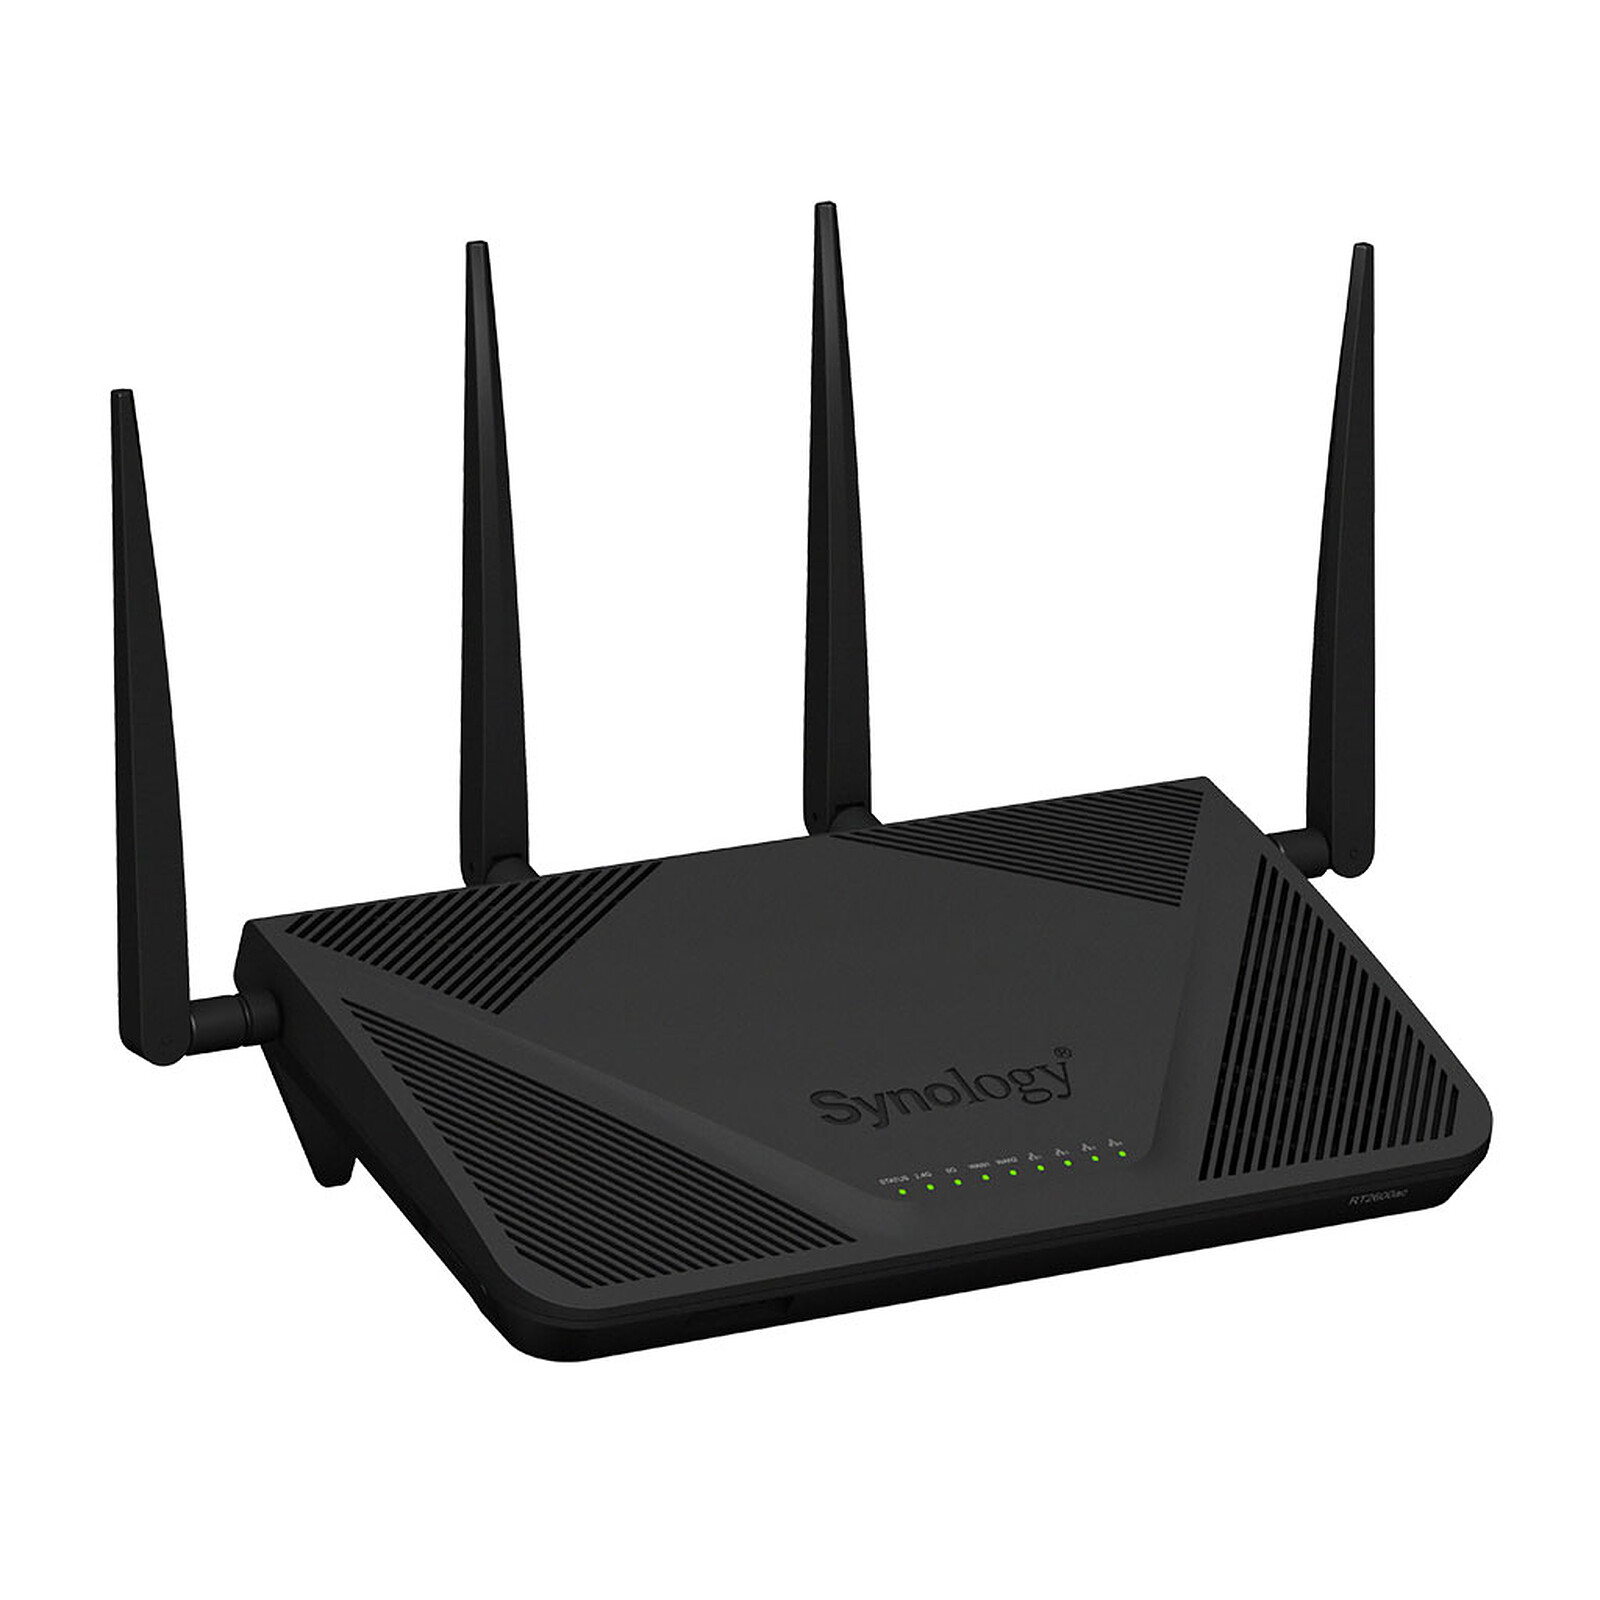 synology router vpn plus is built on openvpn